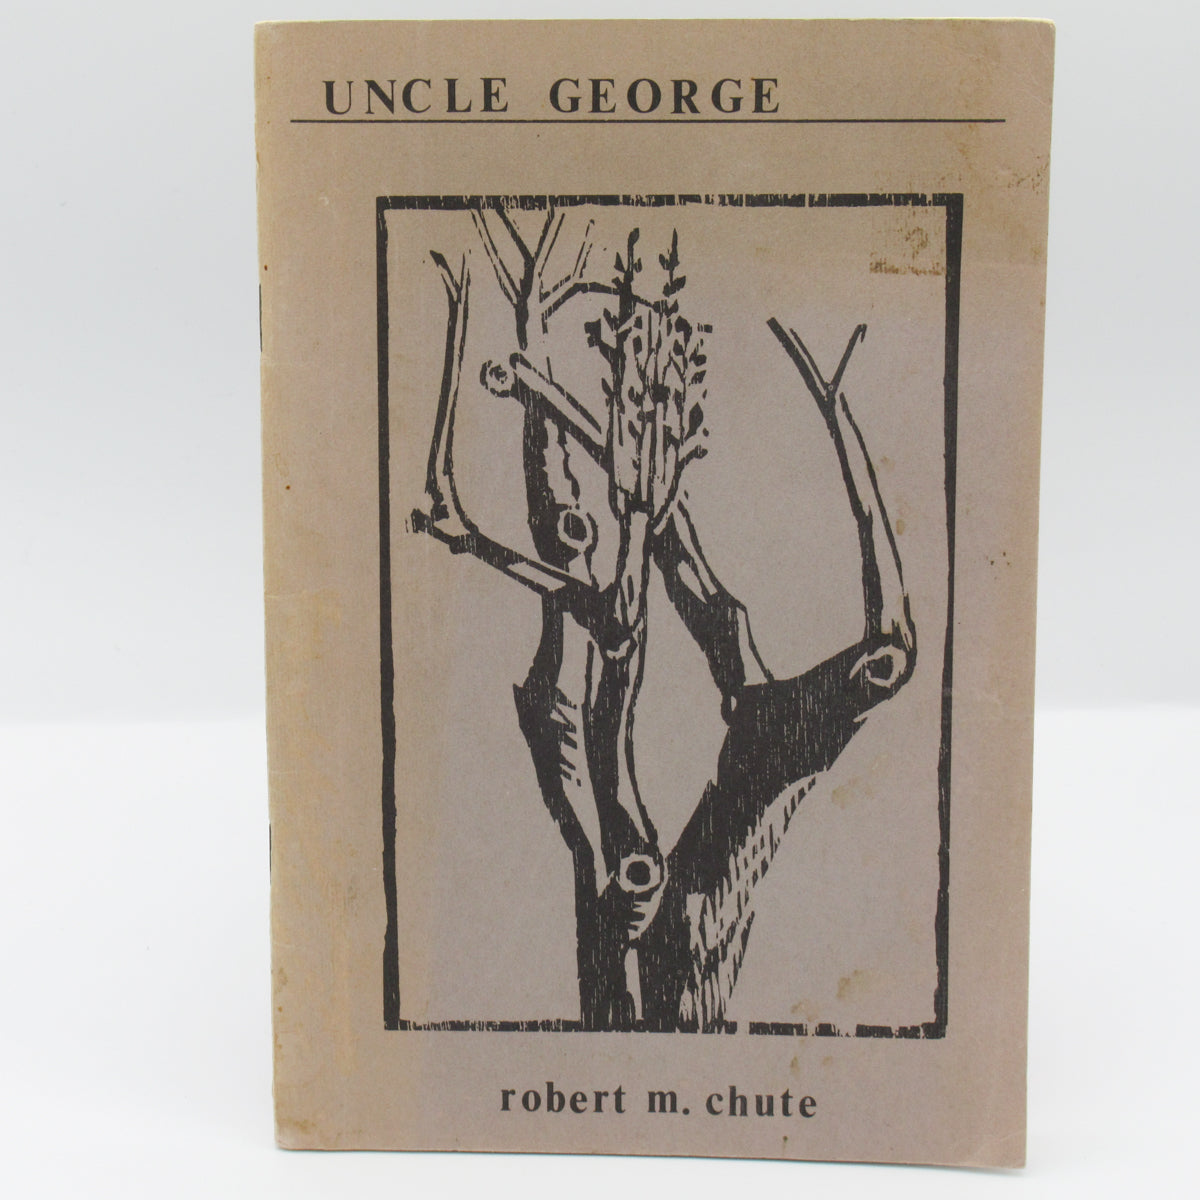 Uncle George: Poems From a Maine Boyhood